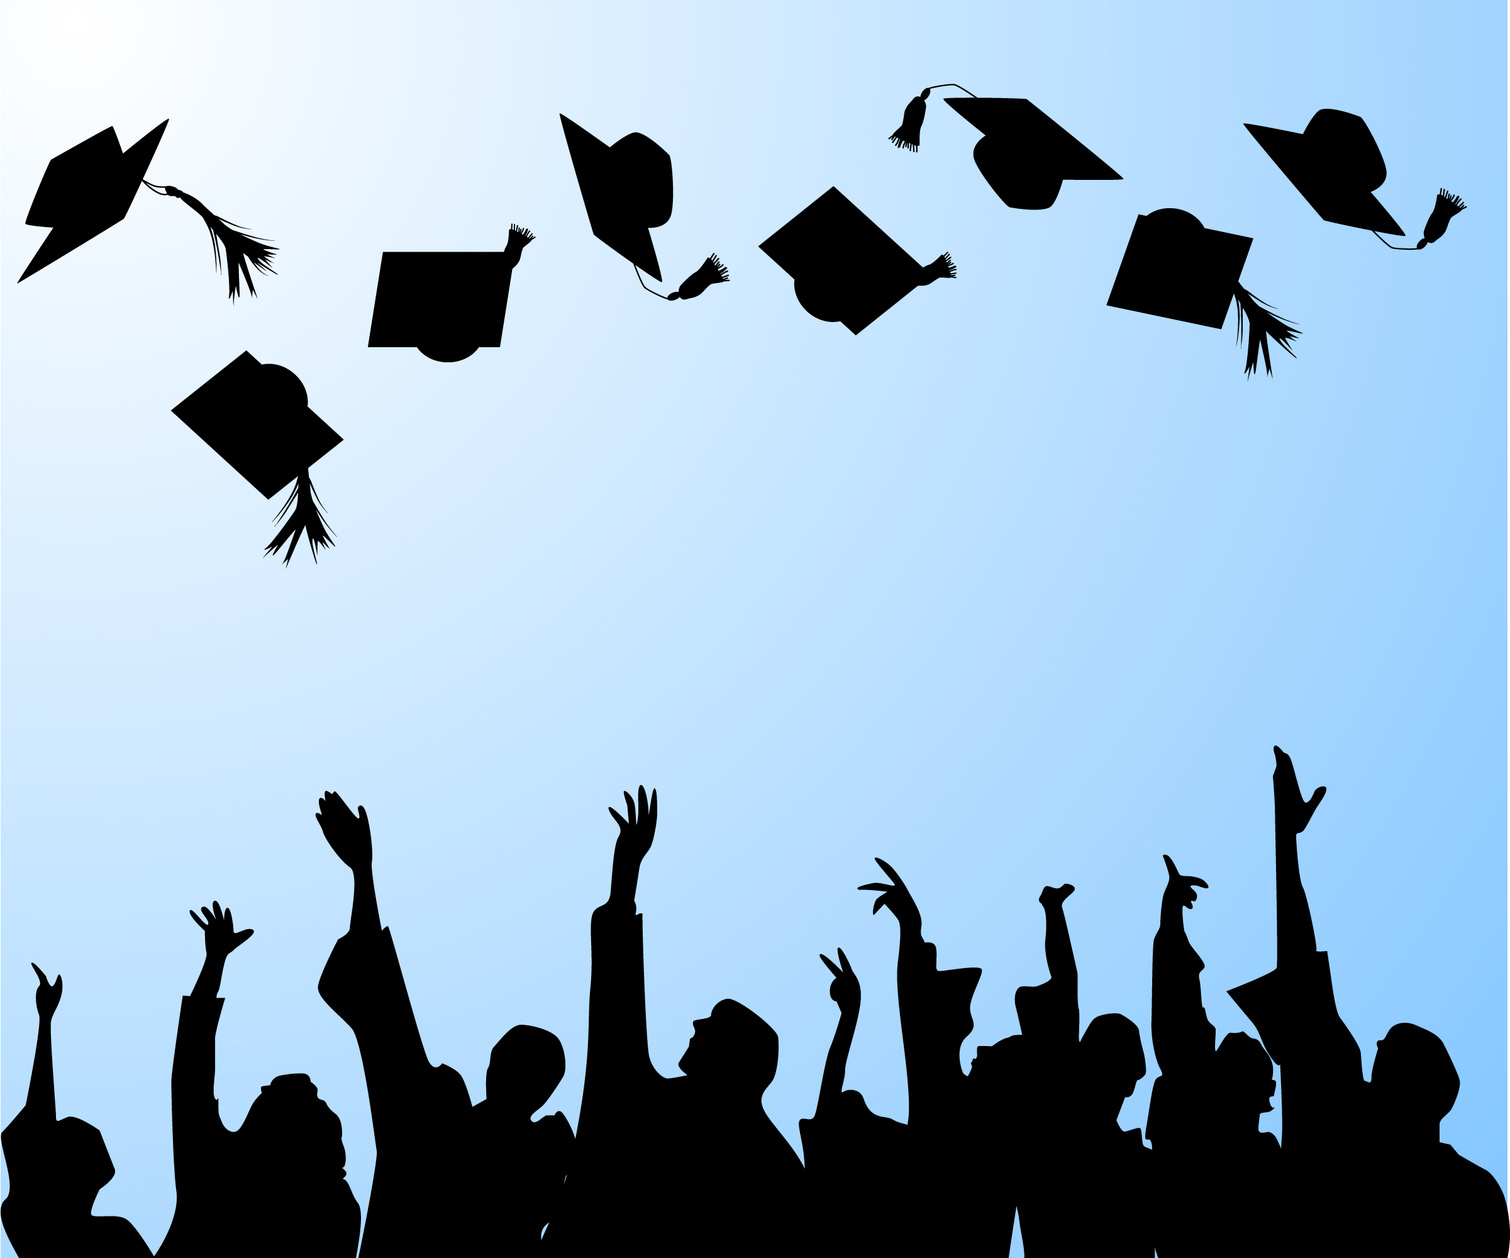 THU congratulates the graduates of the Faculty of Law